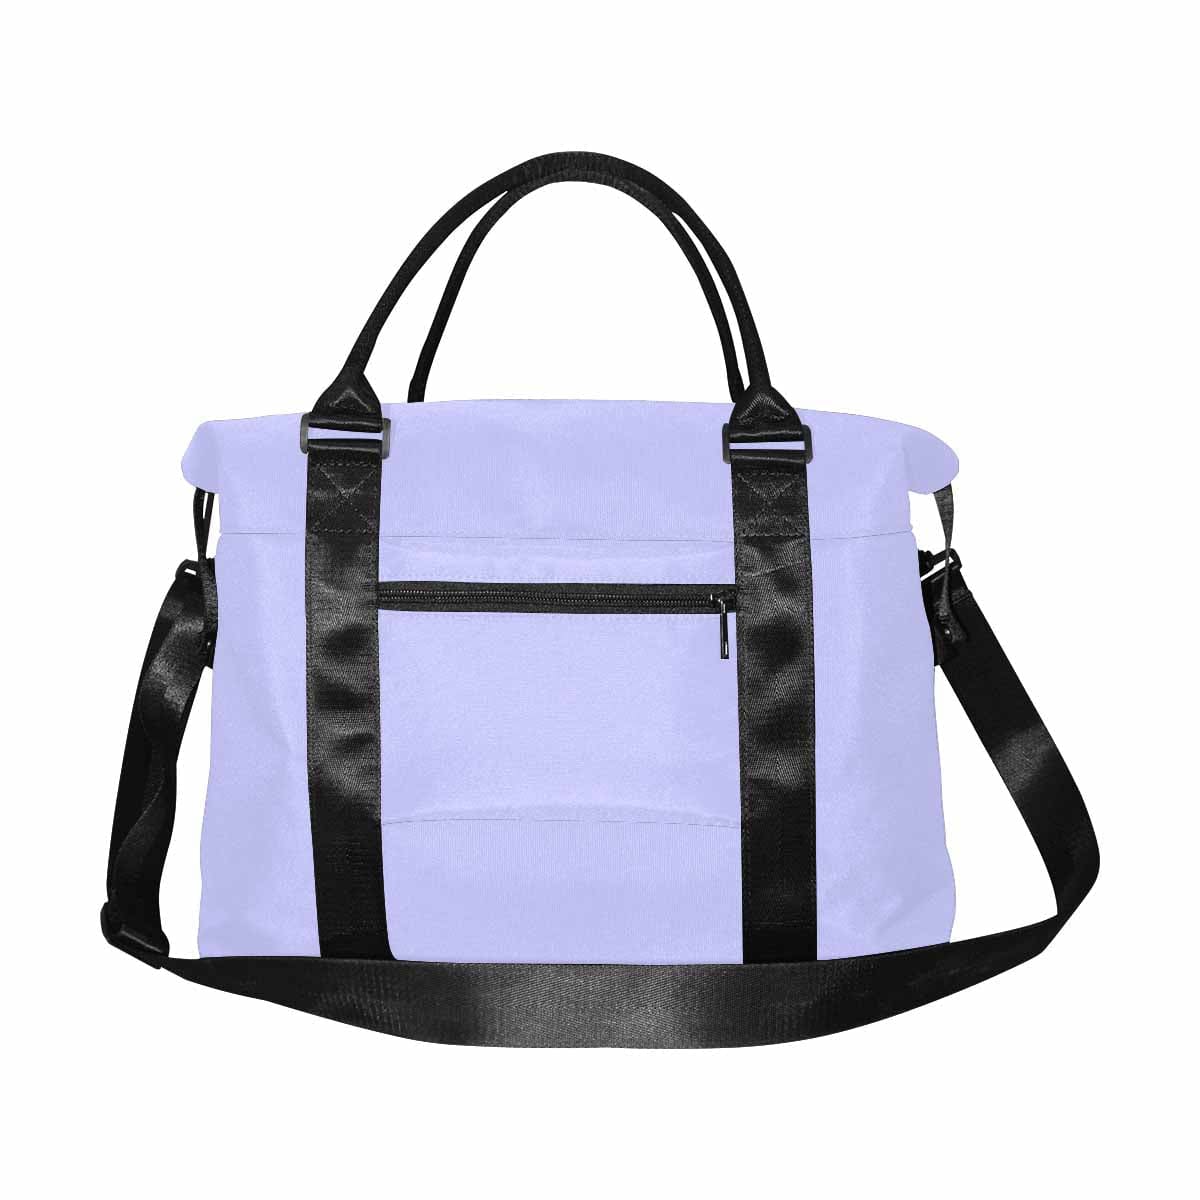 Travel Bag Periwinkle Purple Canvas Carry On - Bags | Travel Bags | Canvas Carry